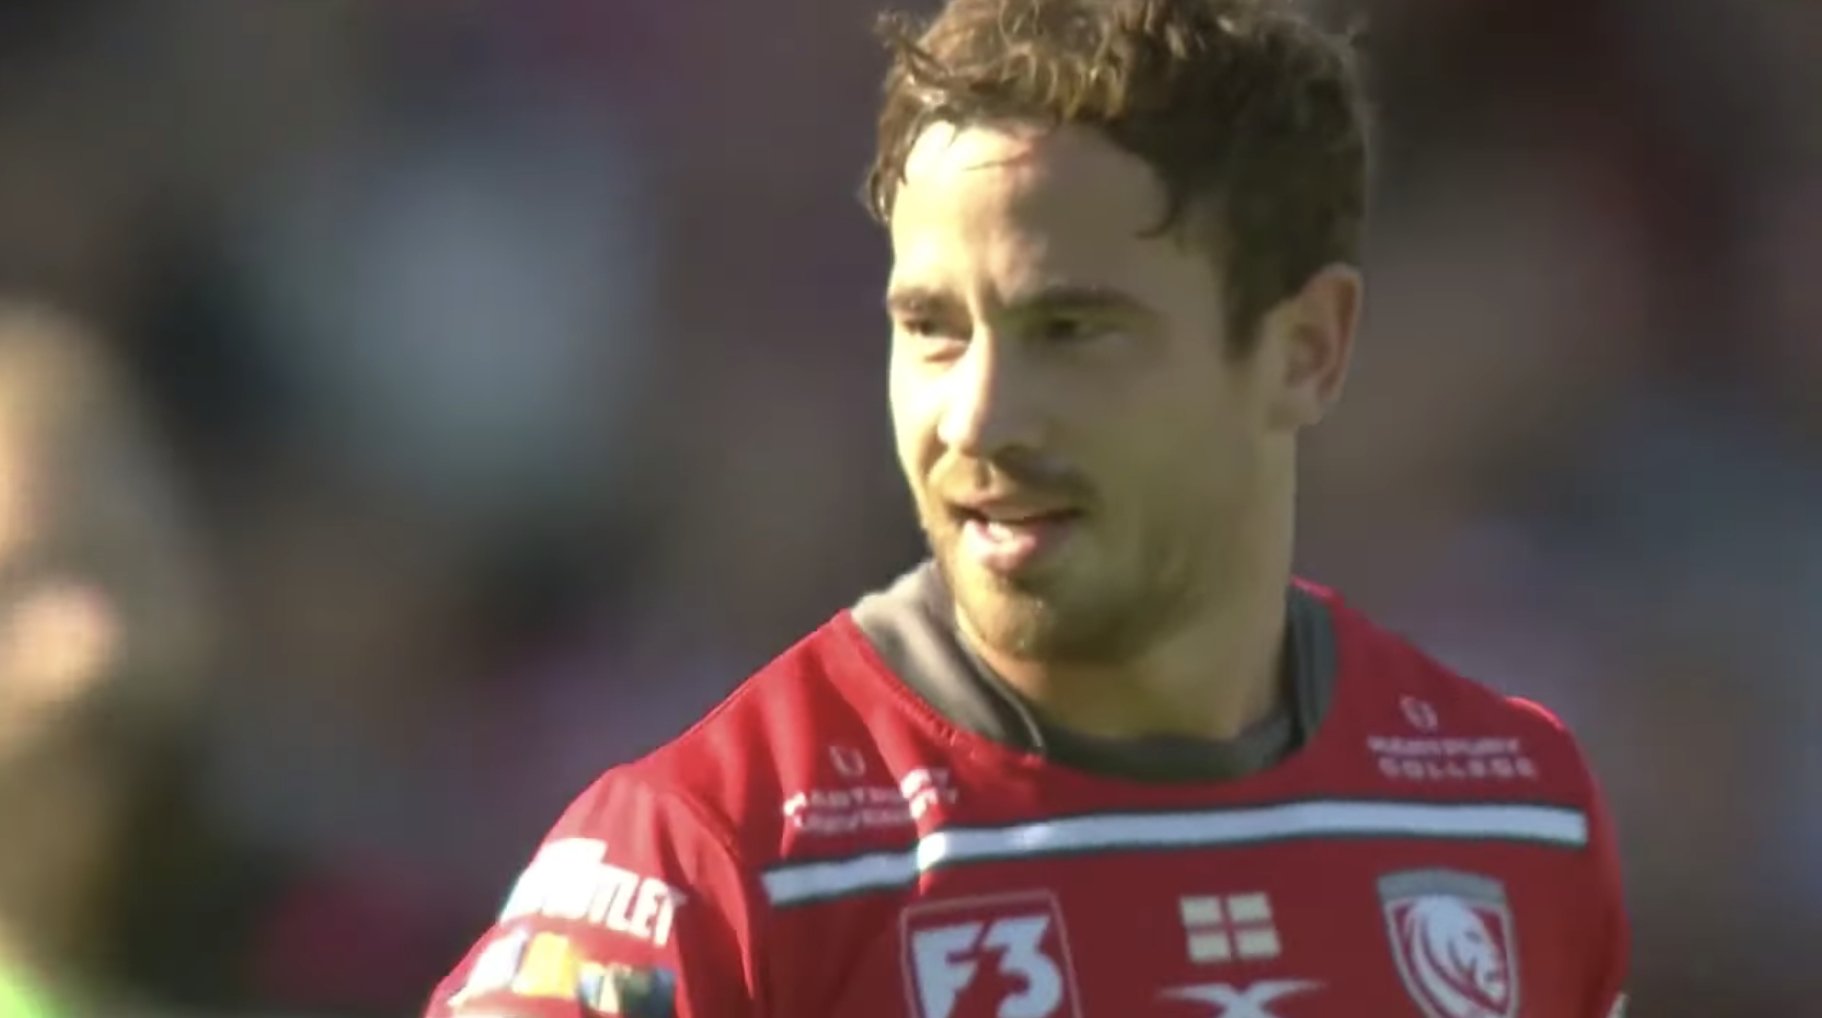 Cipriani official 2019 highlight reel proves he MUST play for England